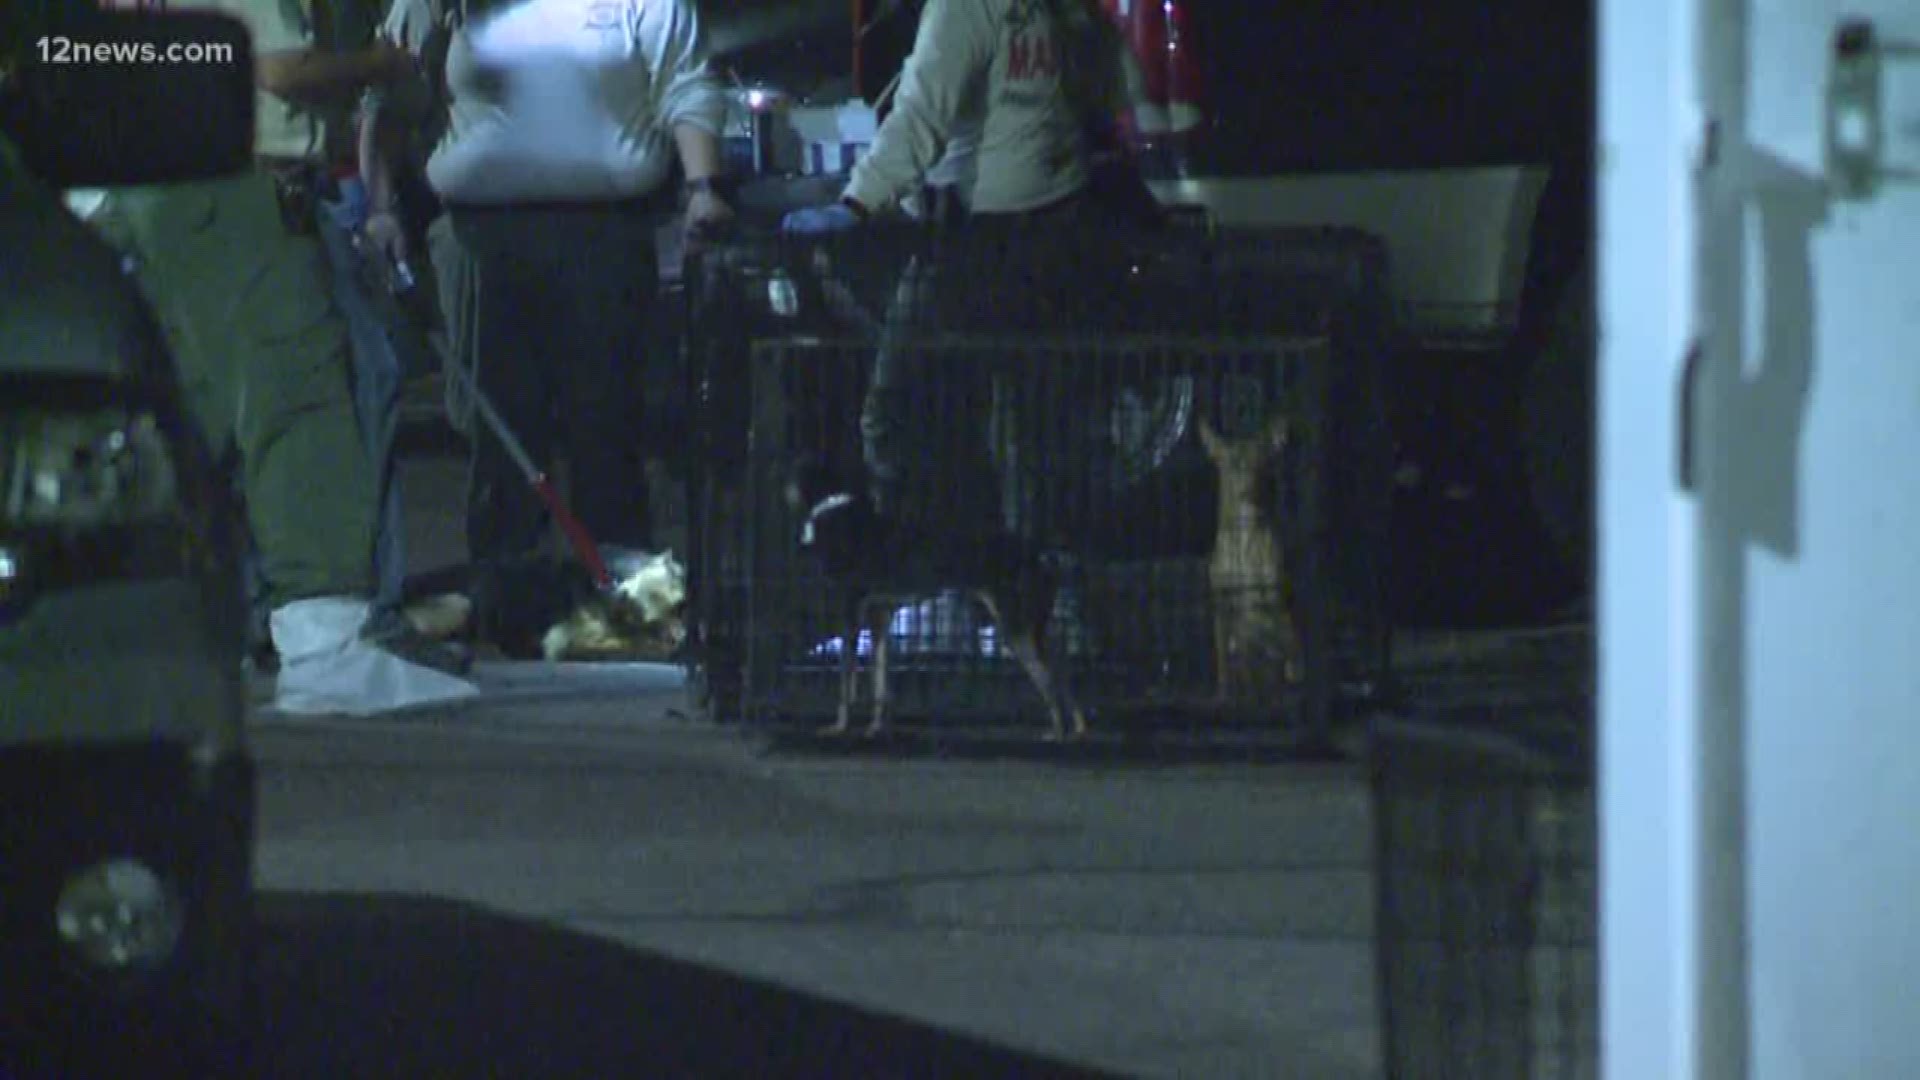 Dozens of dogs had to be rescued from an animal shelter in Mesa. Many found are malnourished, one died early this morning.